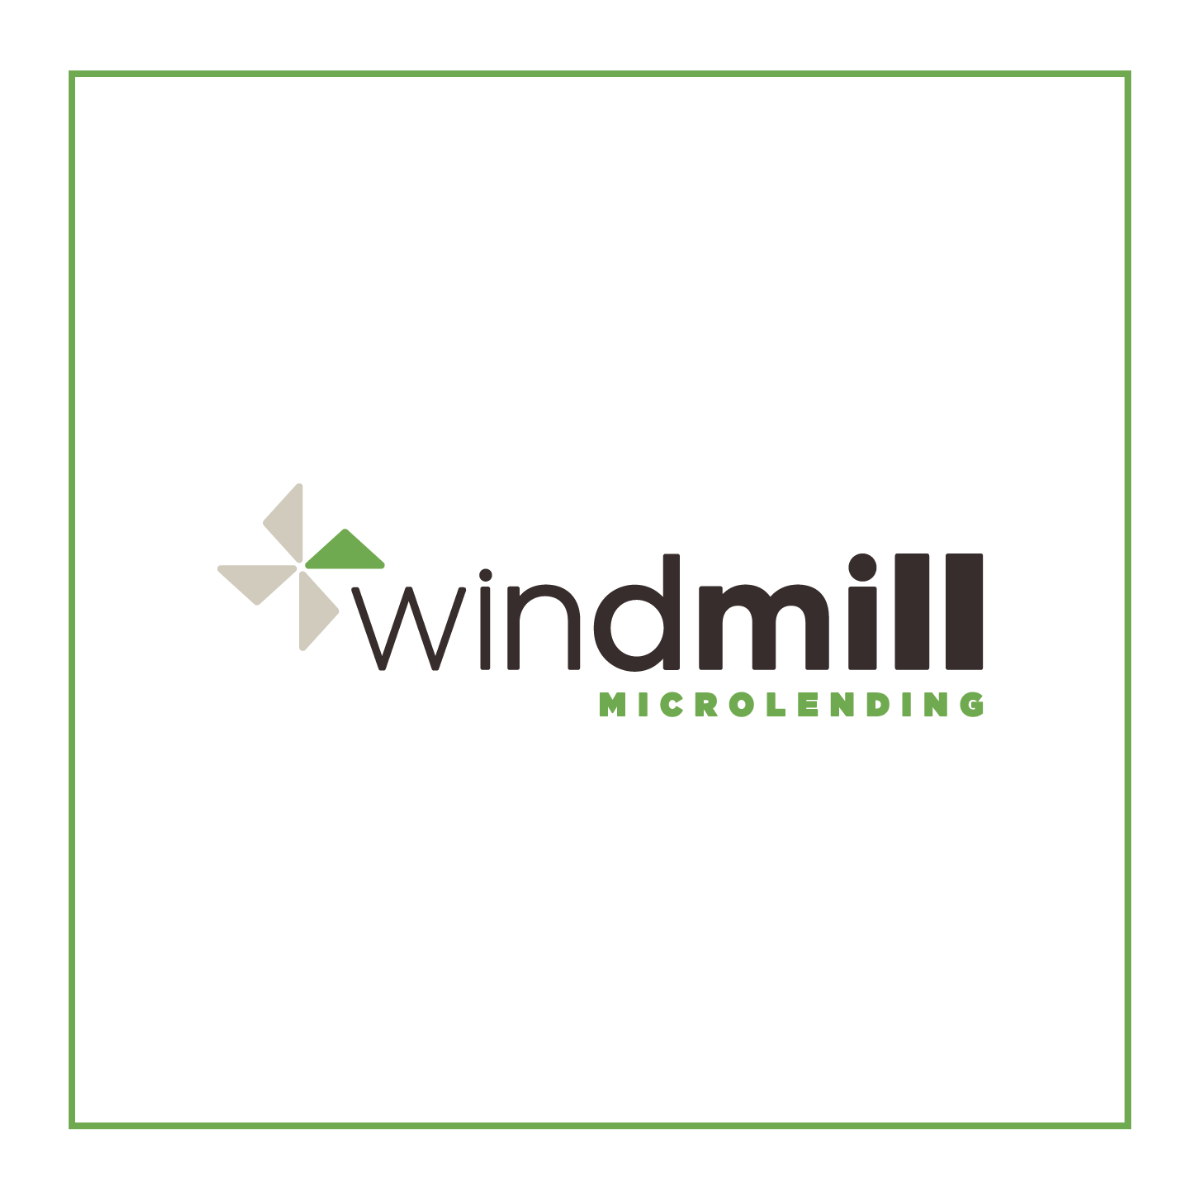 https://loanscanada.ca/wp-content/uploads/2023/05/windmill-microlening-review.png